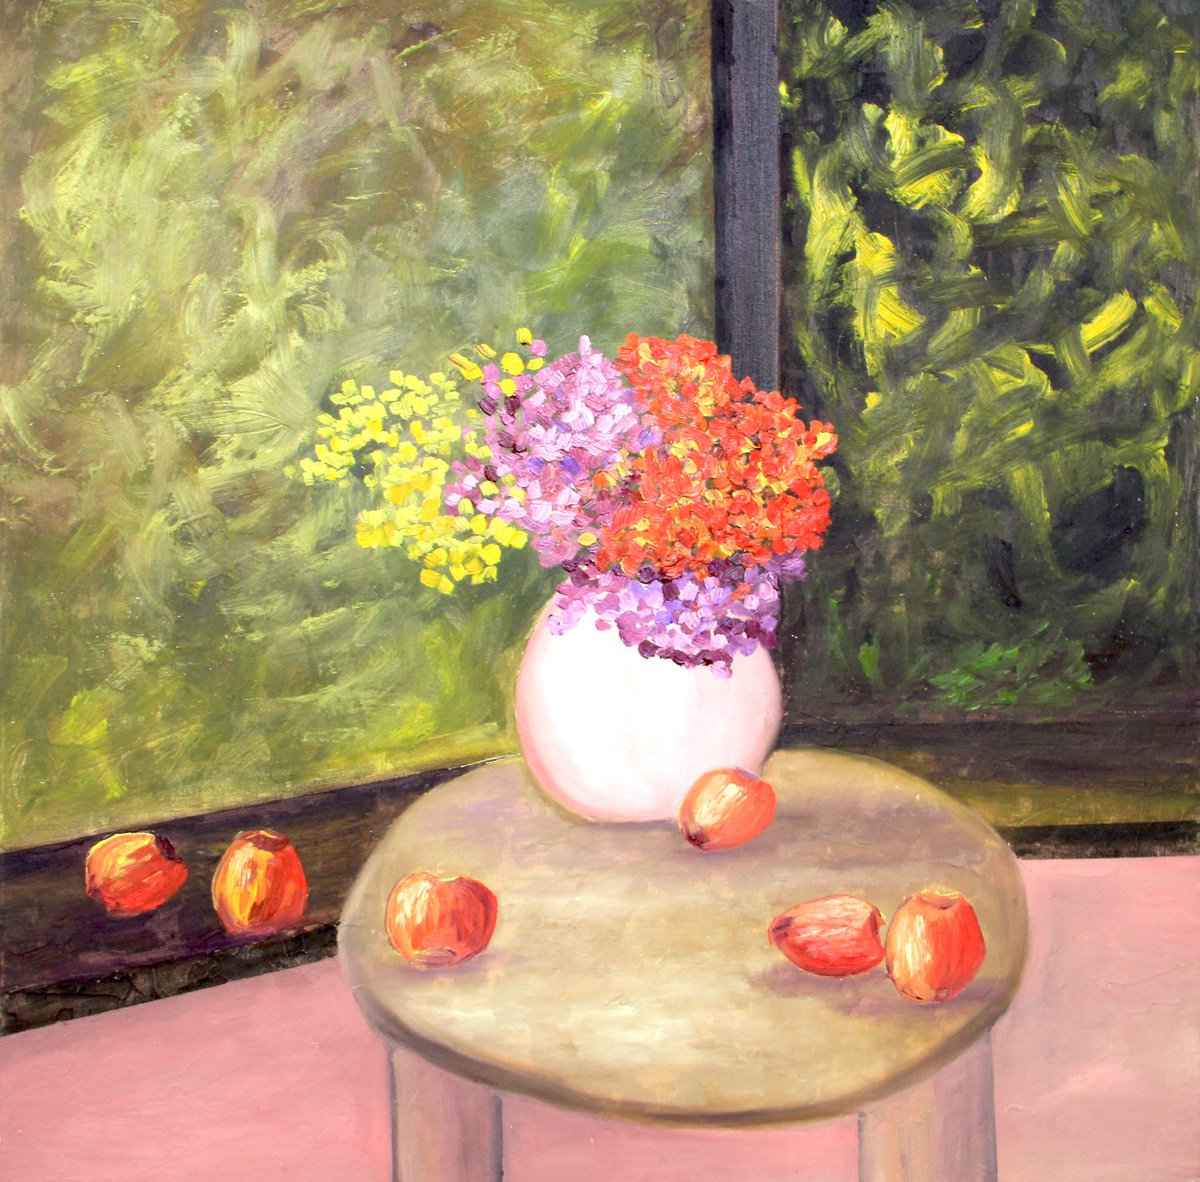 Still life Window to the forest. Original oil painting on canvas by Olya Shevel